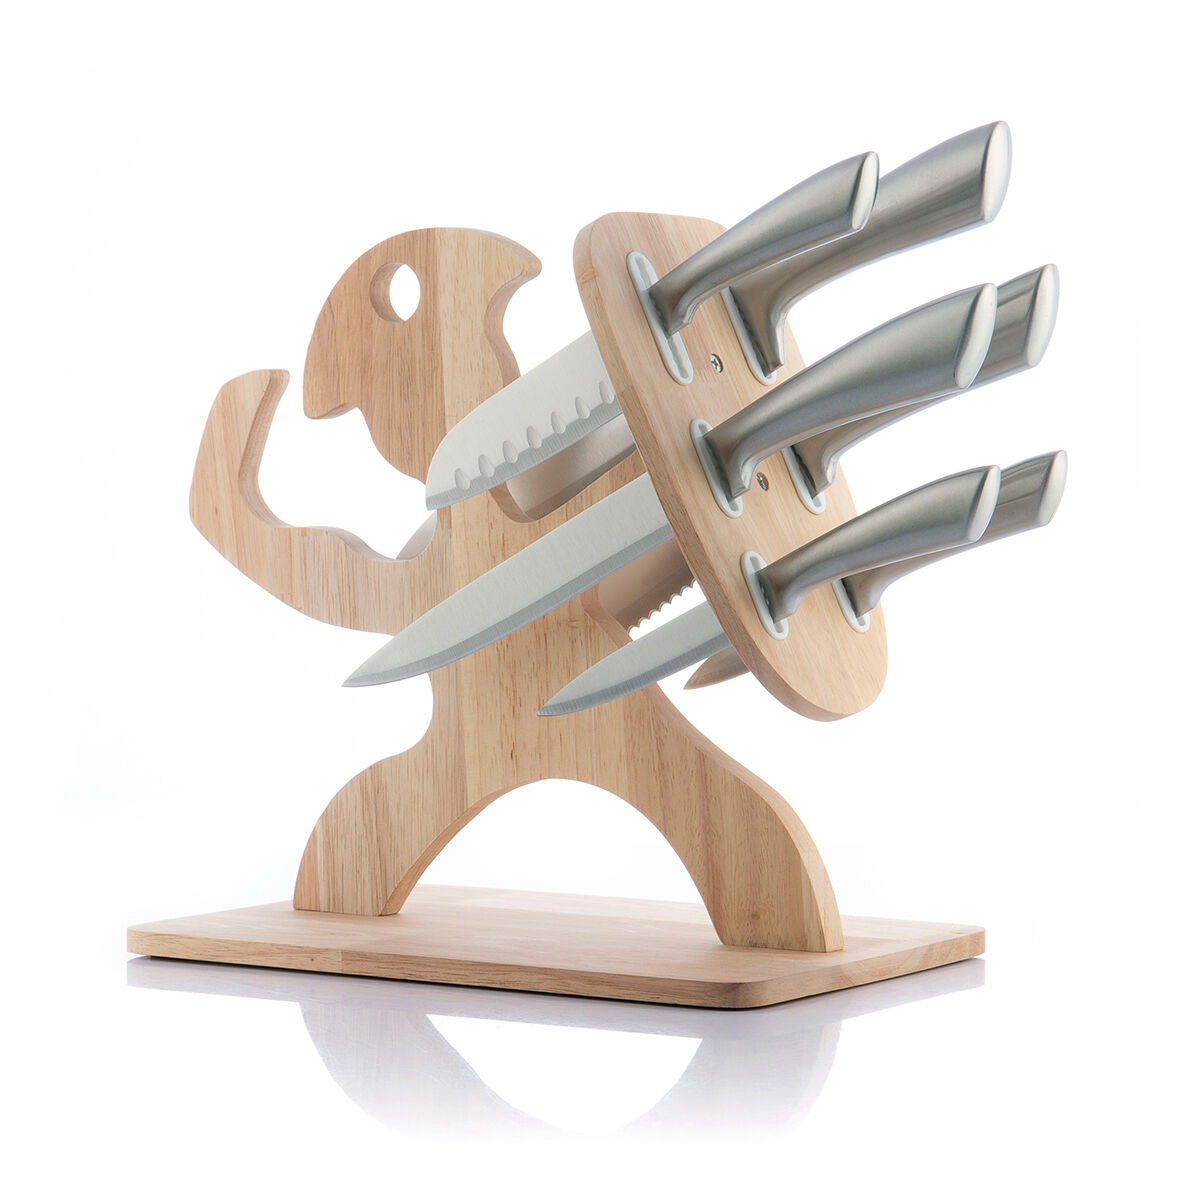 Set of knives with wooden base spartan design